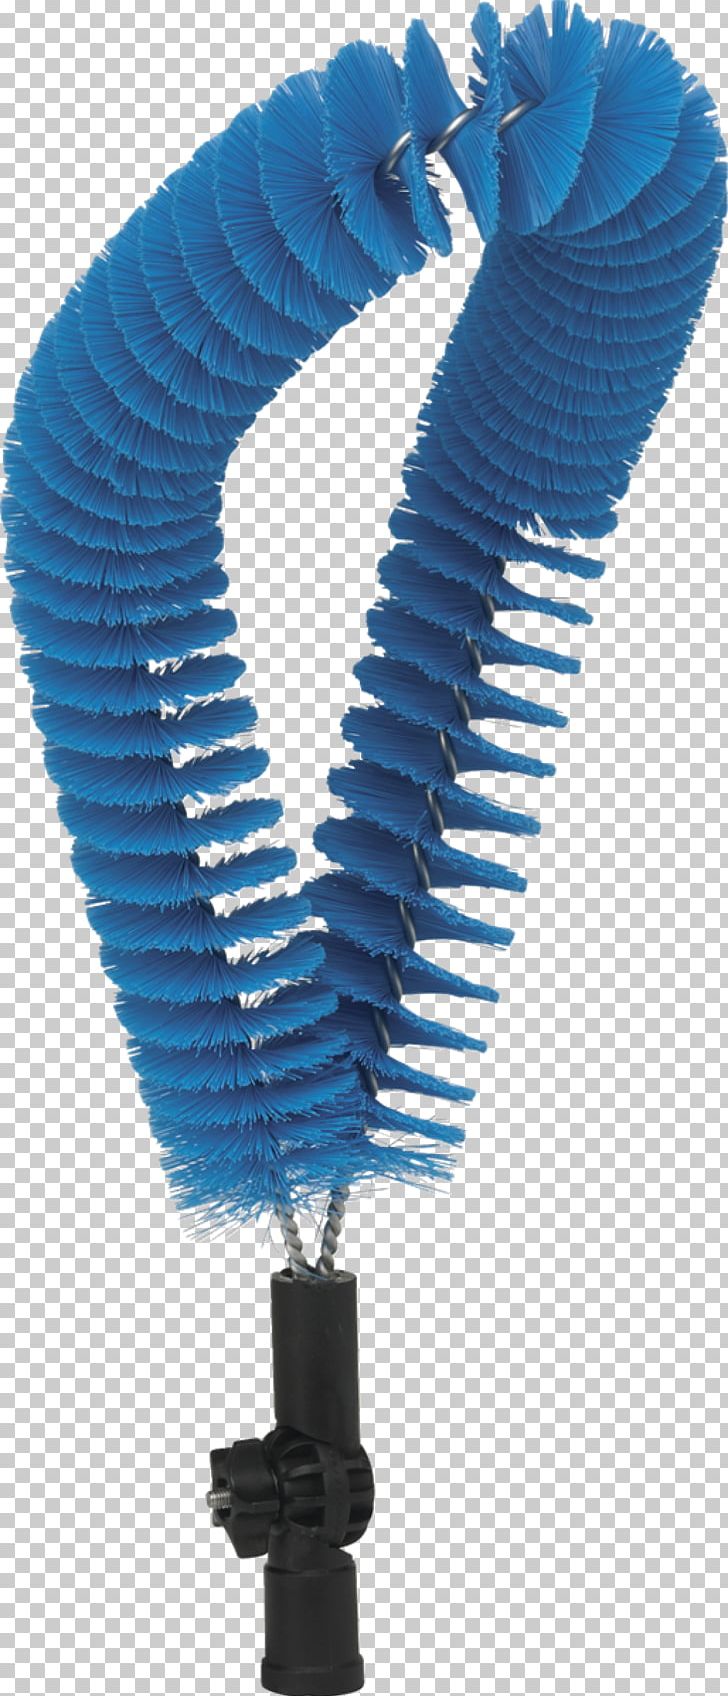 Nayla Brush Cleaning Broom Pipe PNG, Clipart, Blue, Bristle, Broom, Brush, Cleaning Free PNG Download